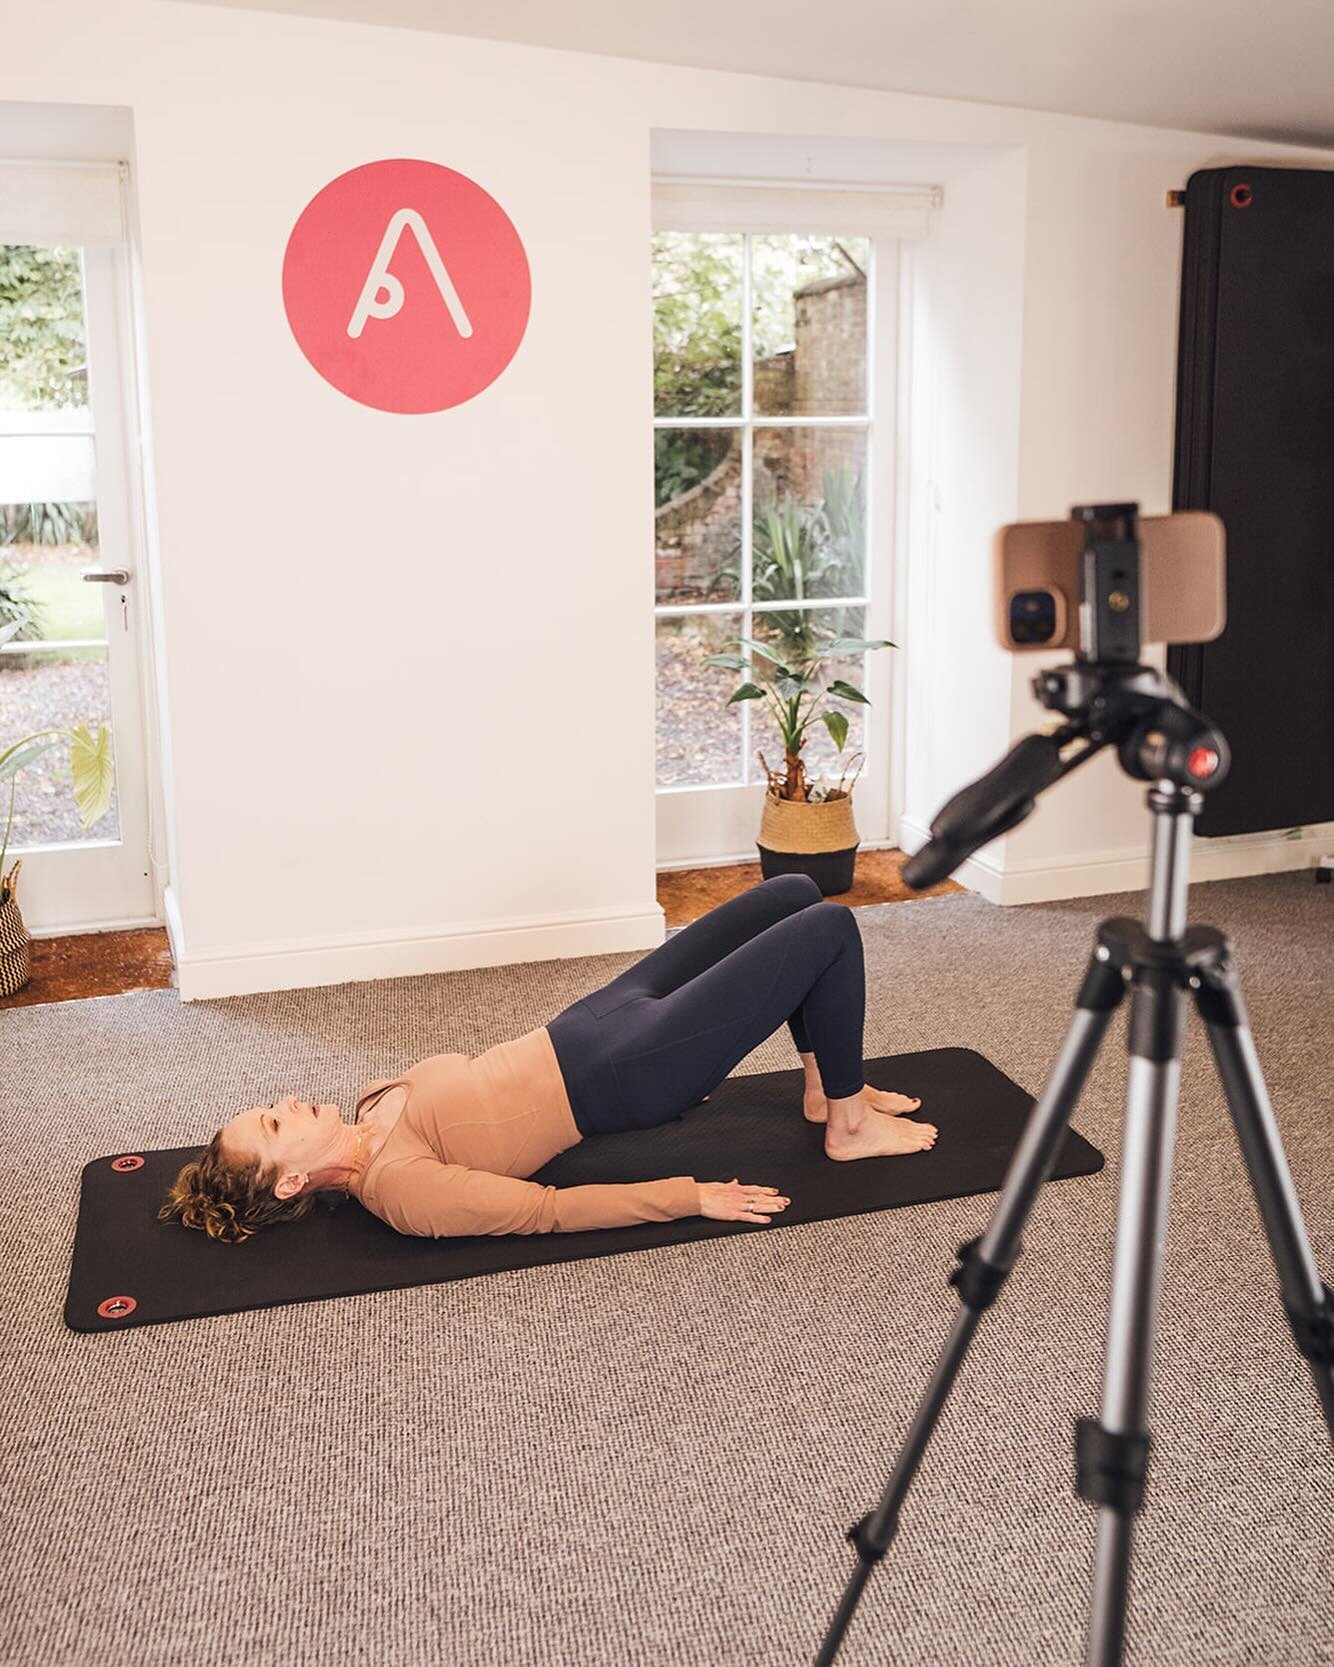 For our At Home members, we&rsquo;ve been busy filming classes for you next month.
Coming in February we&rsquo;ll bring you;
▫️a class to unwind shoulder tension
▫️a class for soothing stillness 
▫️a quick stretch class
▫️30 minute mobility Pilates f